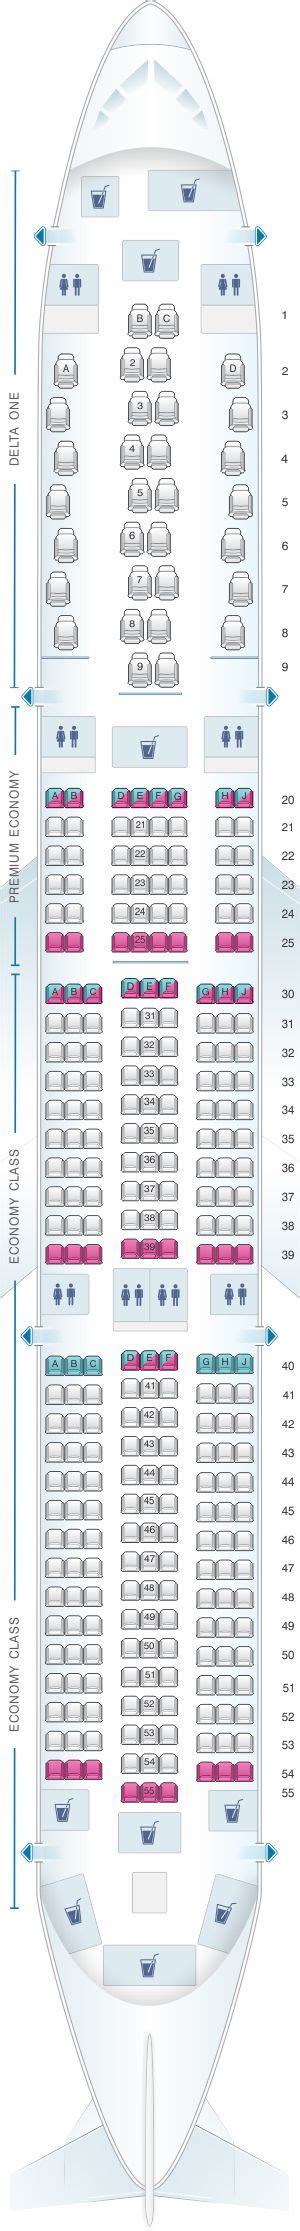 Seat Map Lufthansa Airbus A350 900 Config2 China Eastern Airlines D25